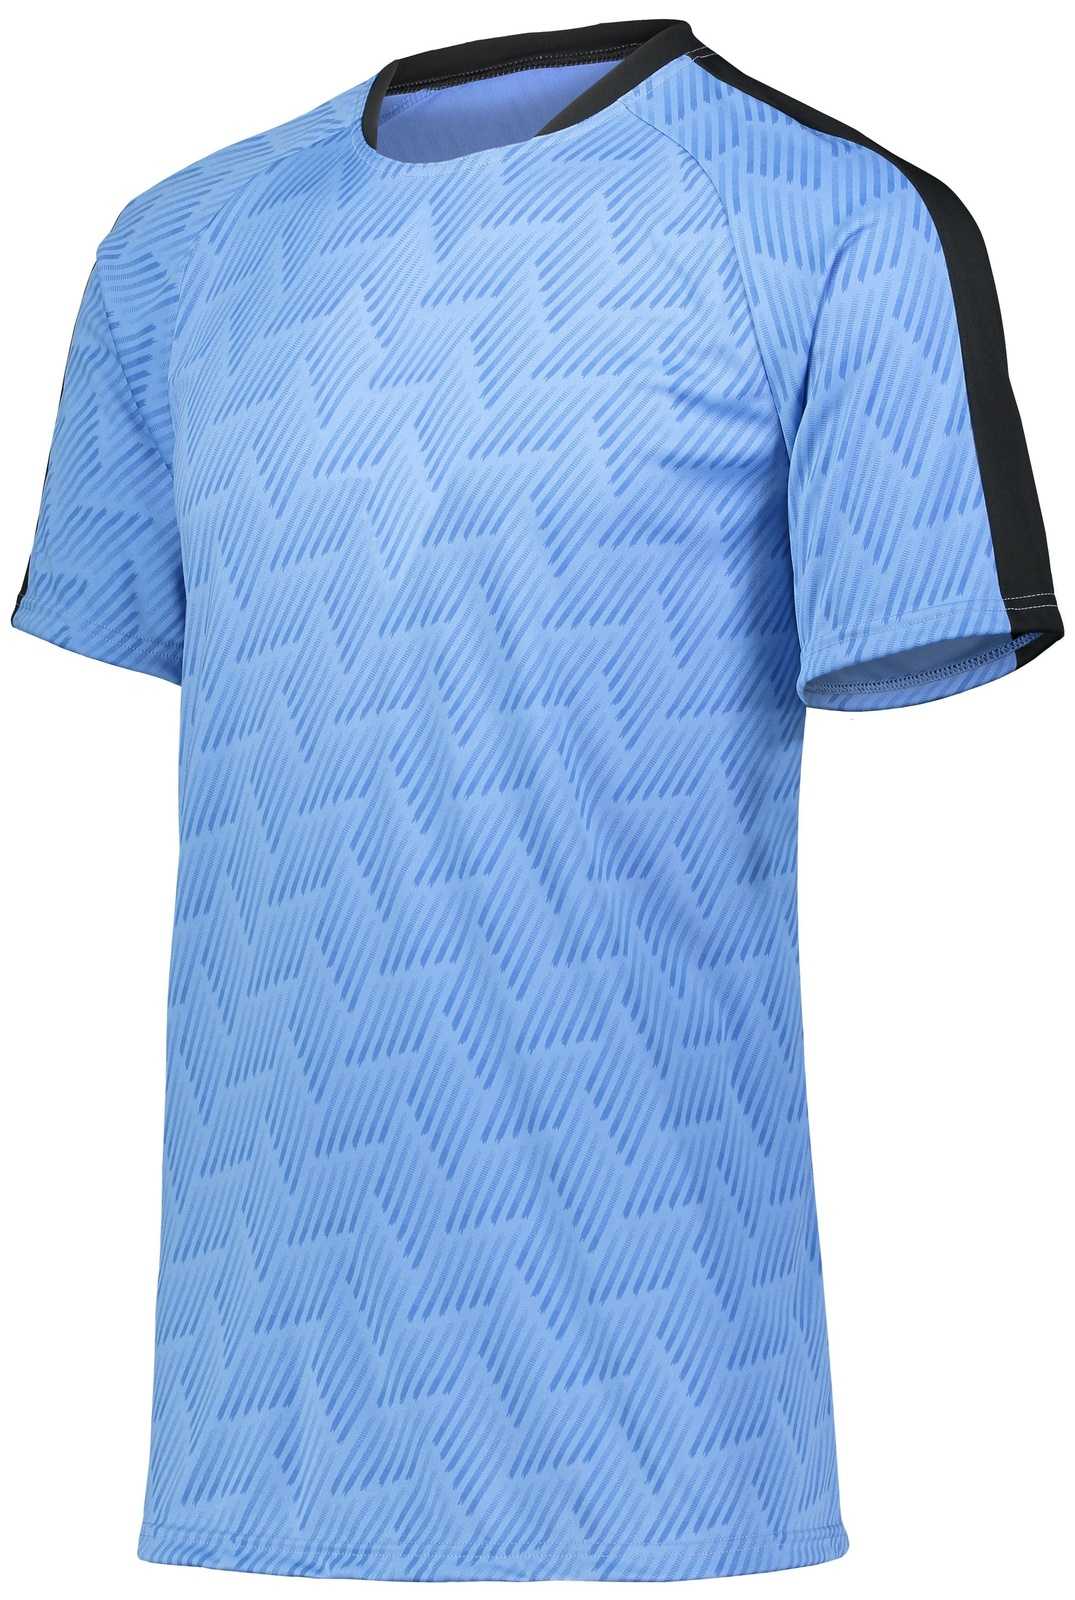 High Five 322981 Youth Hypervolt Jersey - Columbia Blue Print Black - HIT a Double